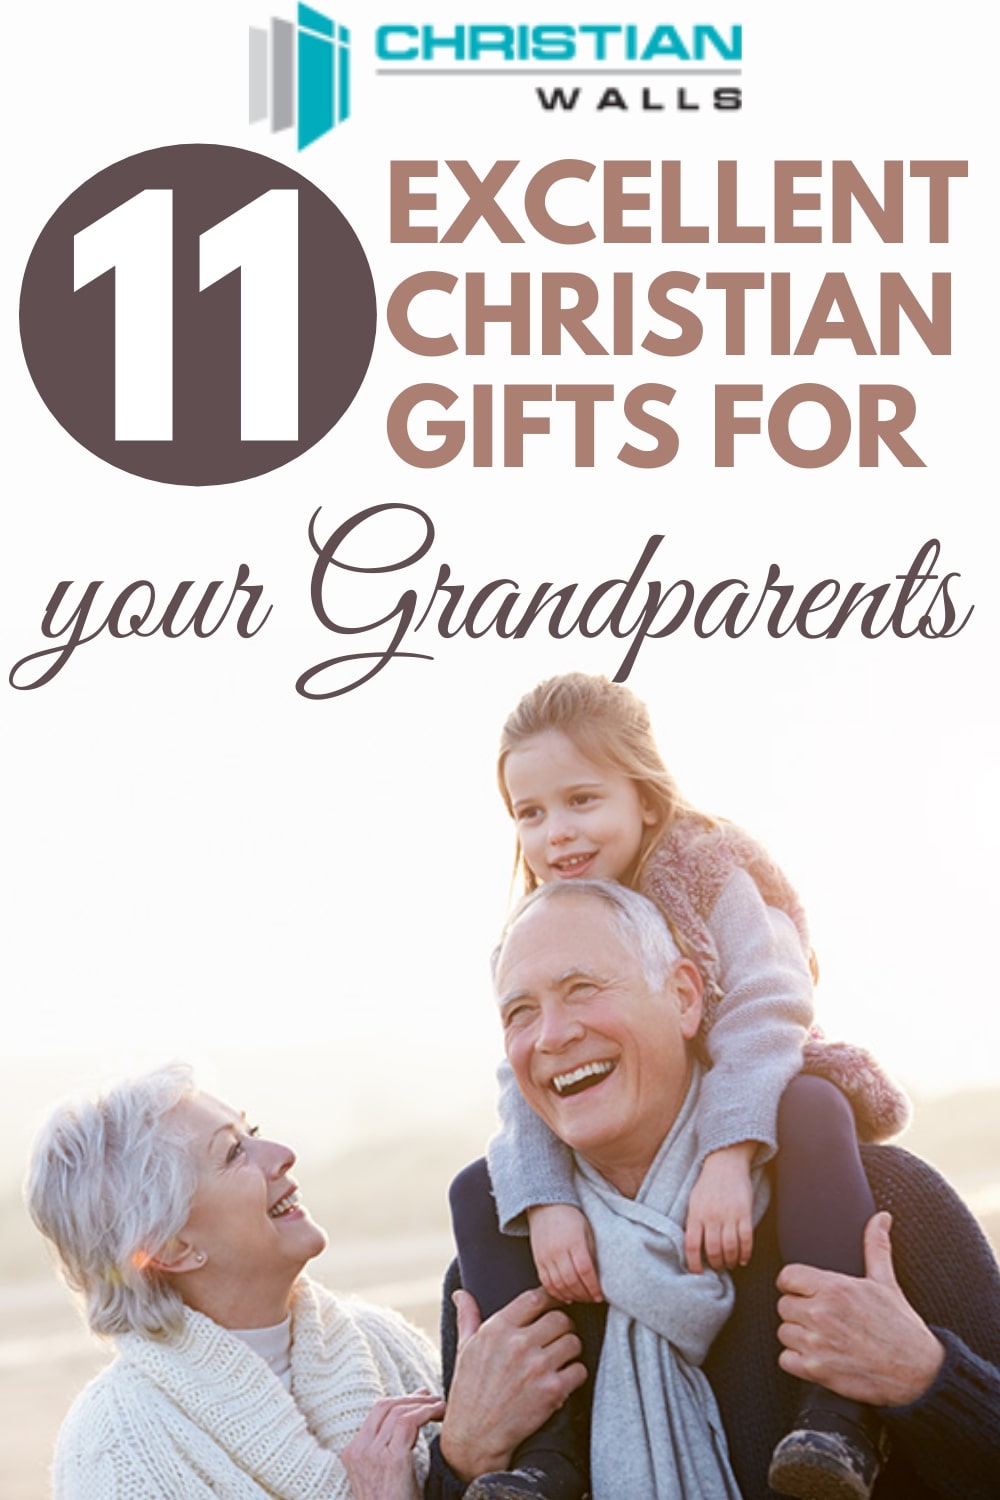 11 Special Gifts for Christian Grandparents (to make them smile) – Christian  Walls